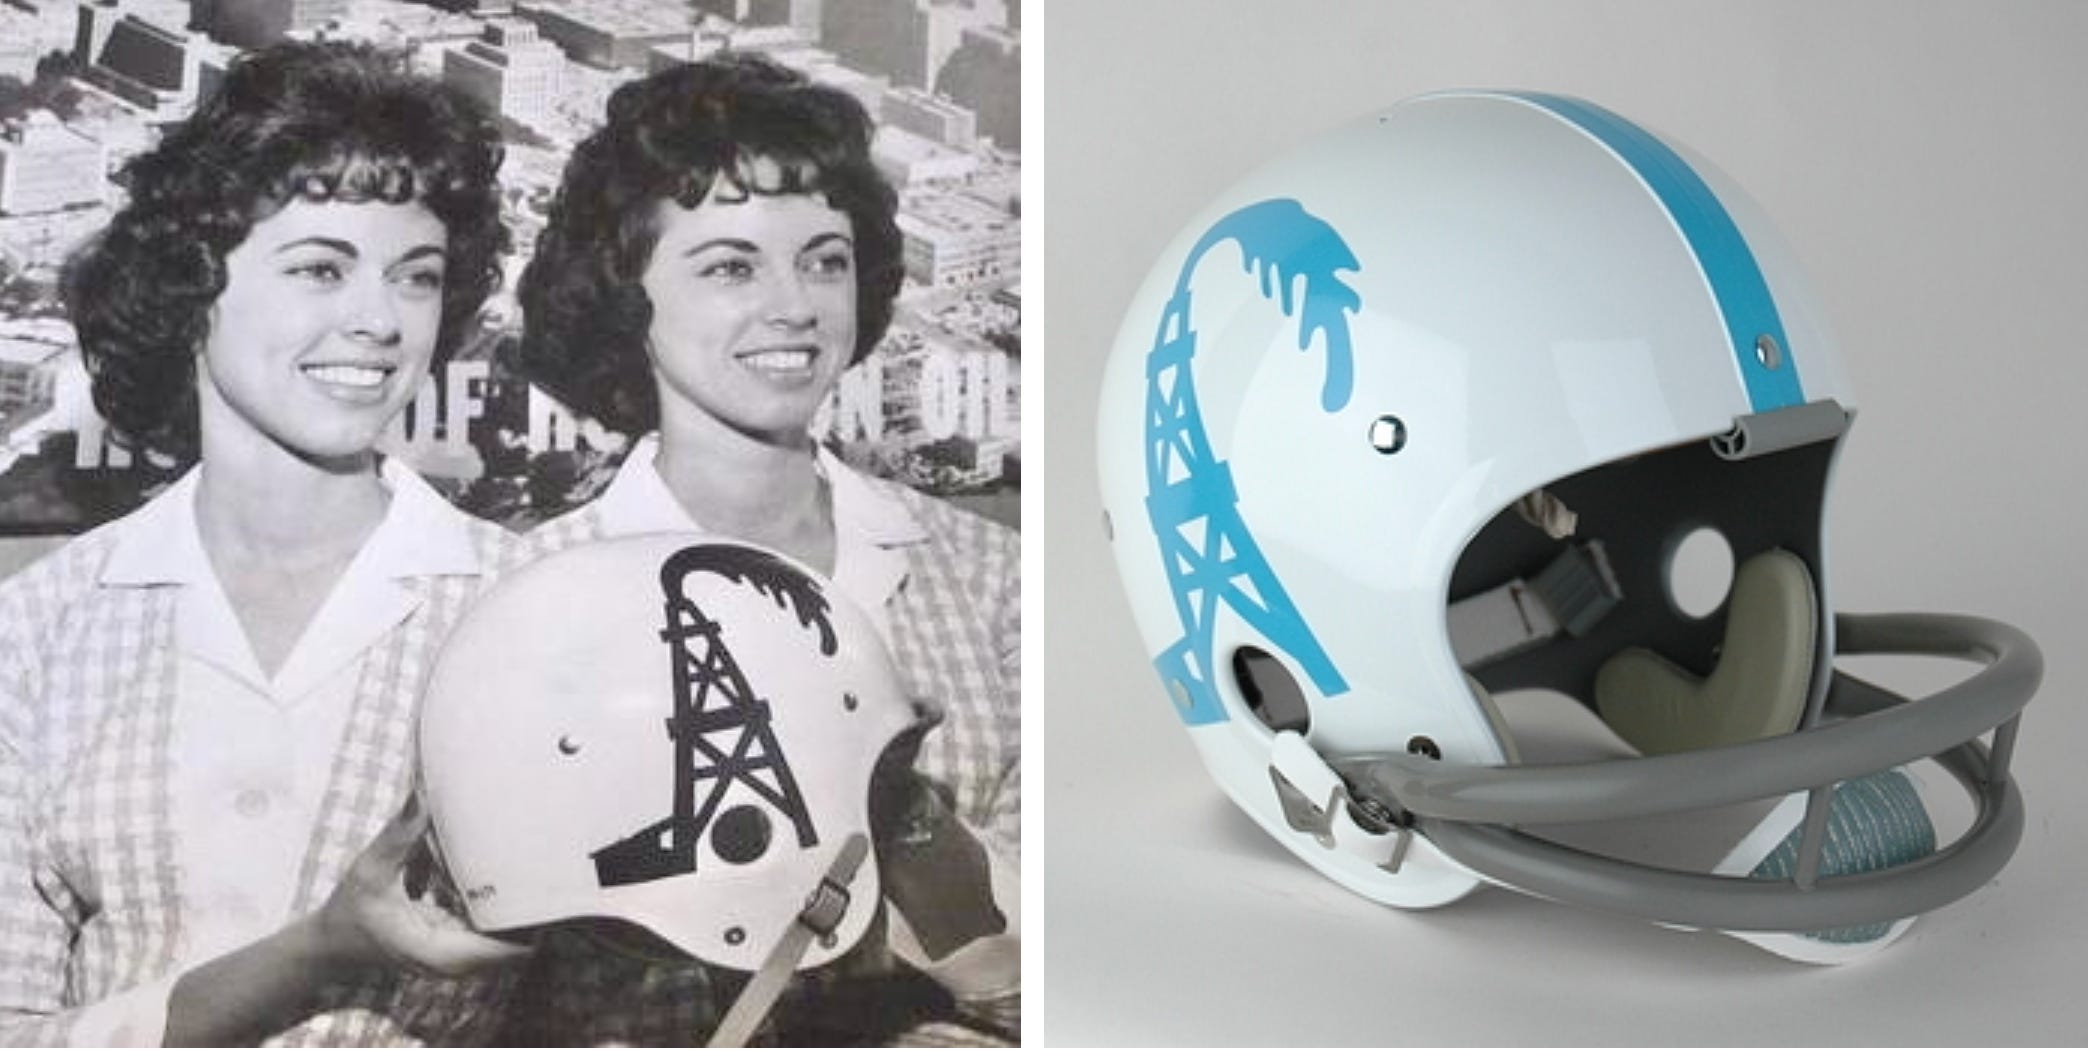 PHOTOS: The Tennessee Titans will wear throwback Oilers uniforms honoring  the team's history; do you agree?